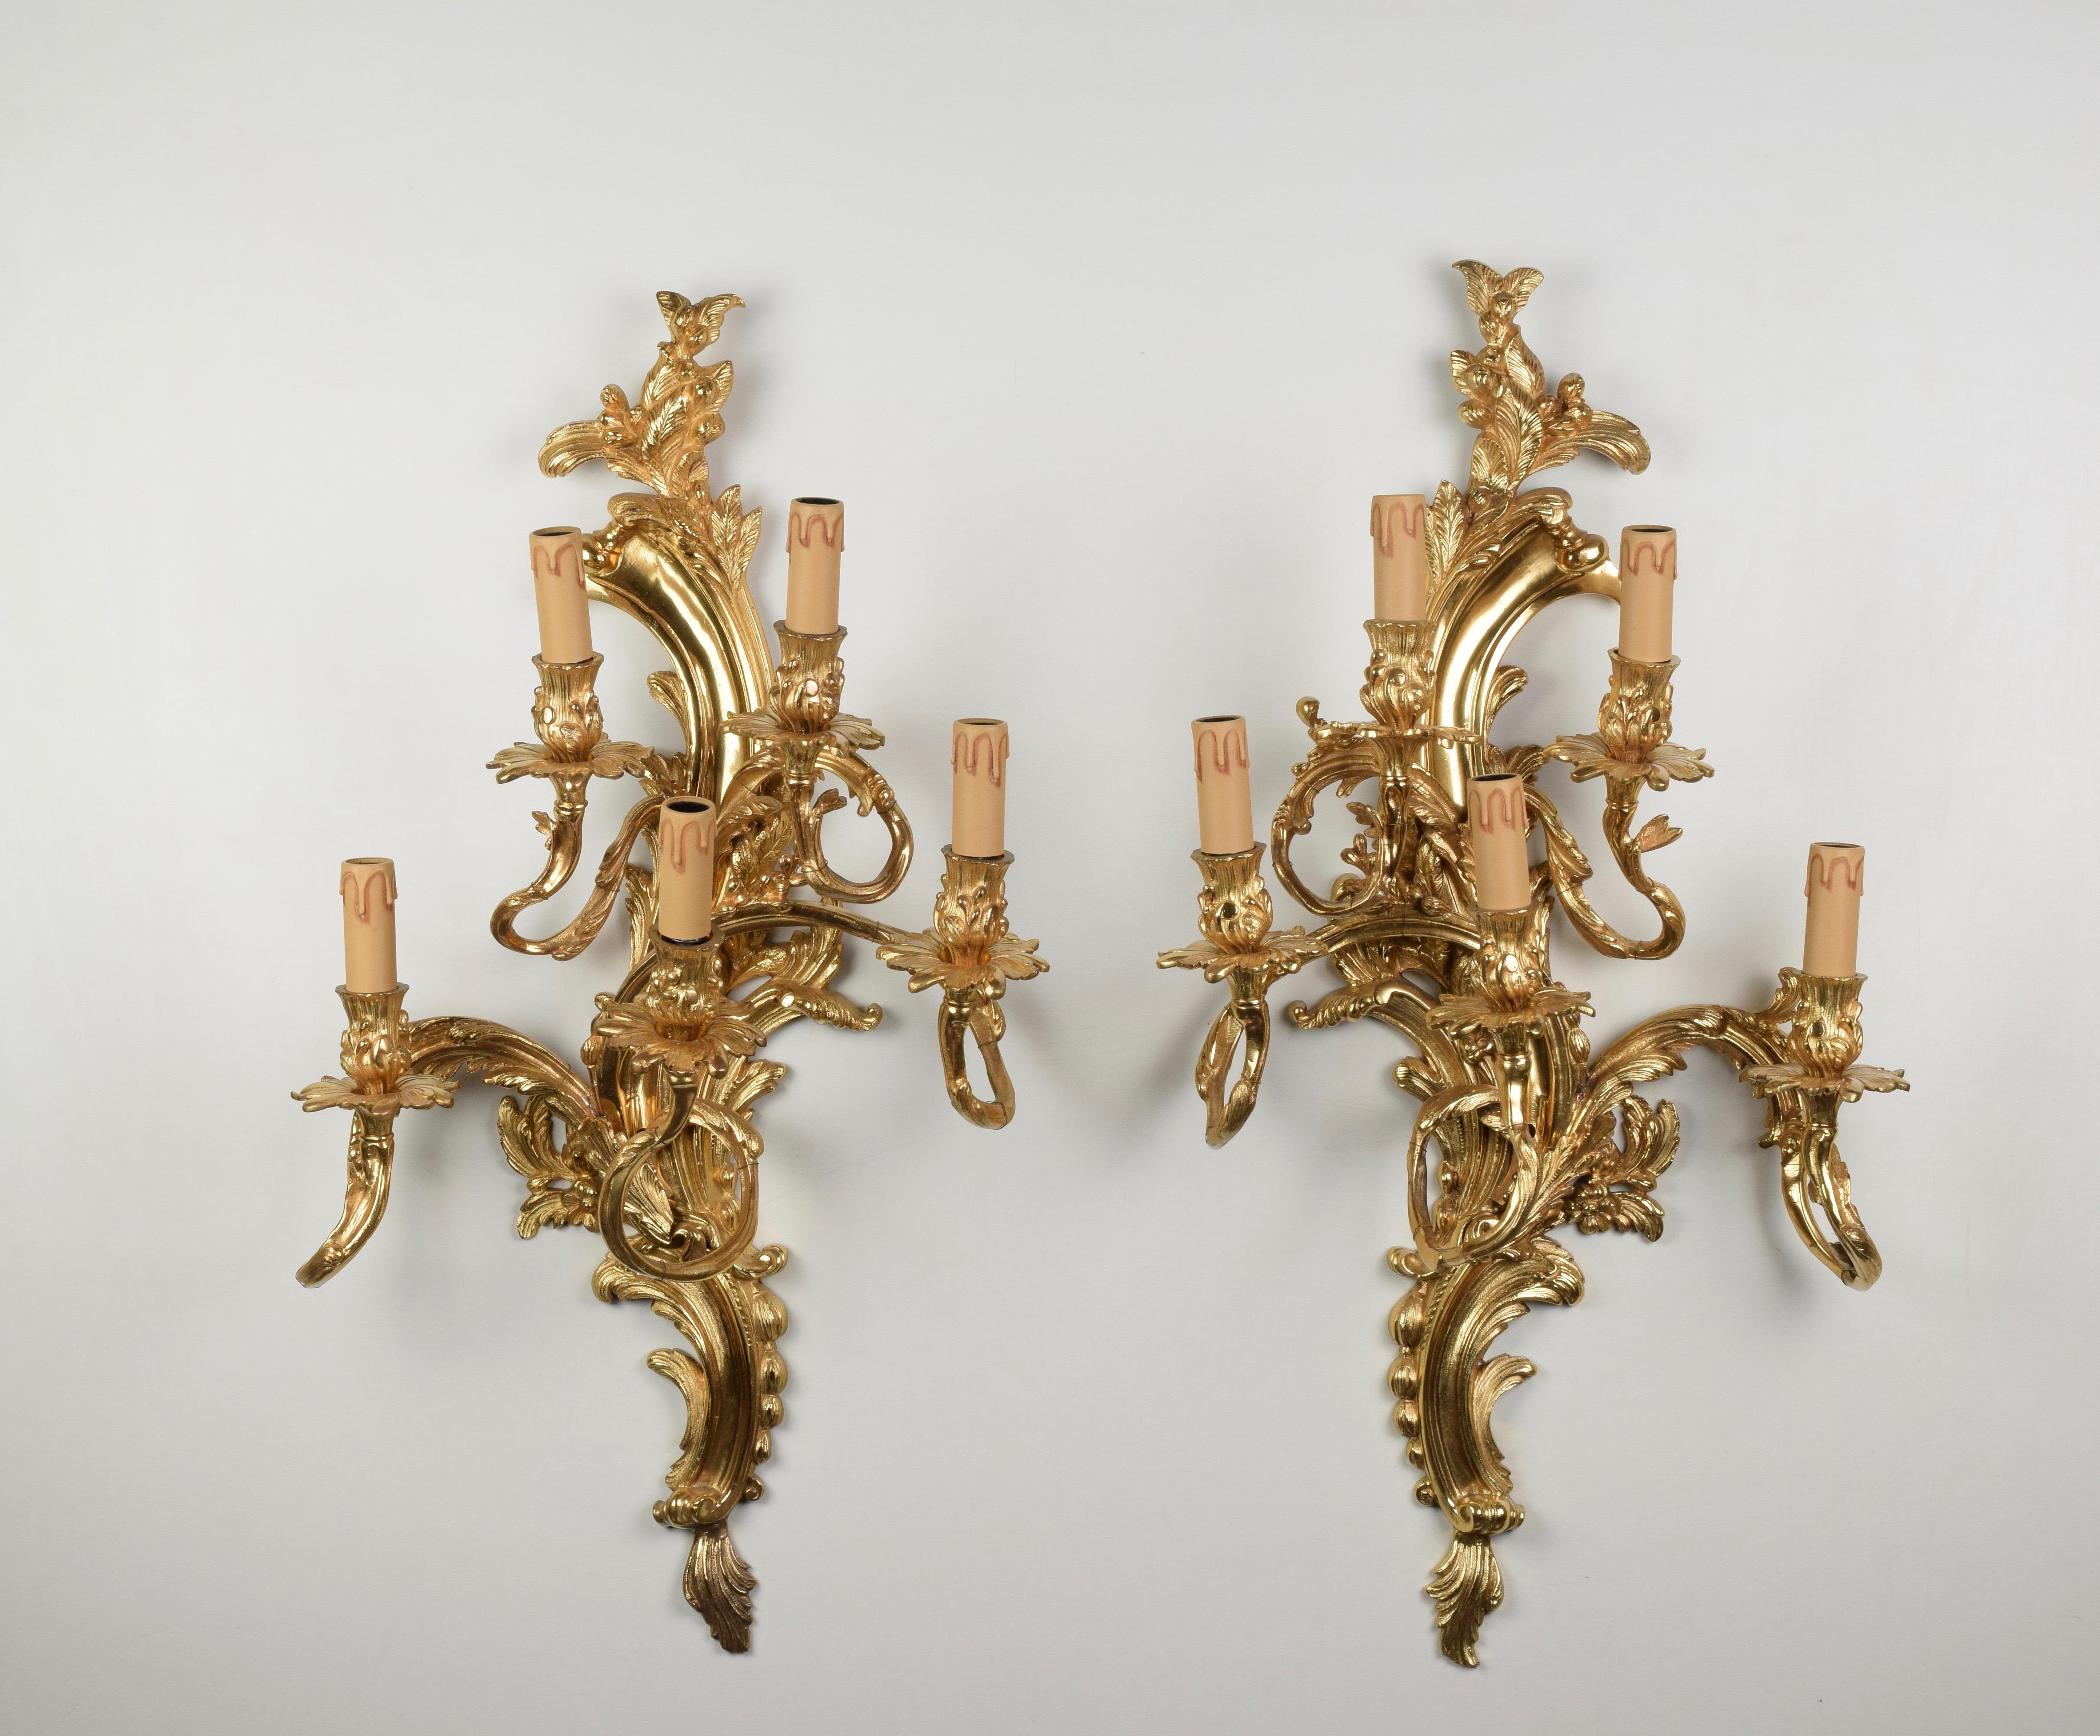 Italy, mid-20th century
Five lights.
Decorated with floral themed acanthus leaves typical of the Louis XV style.
Electric wiring and spark plug for light bulbs with E14 socket.